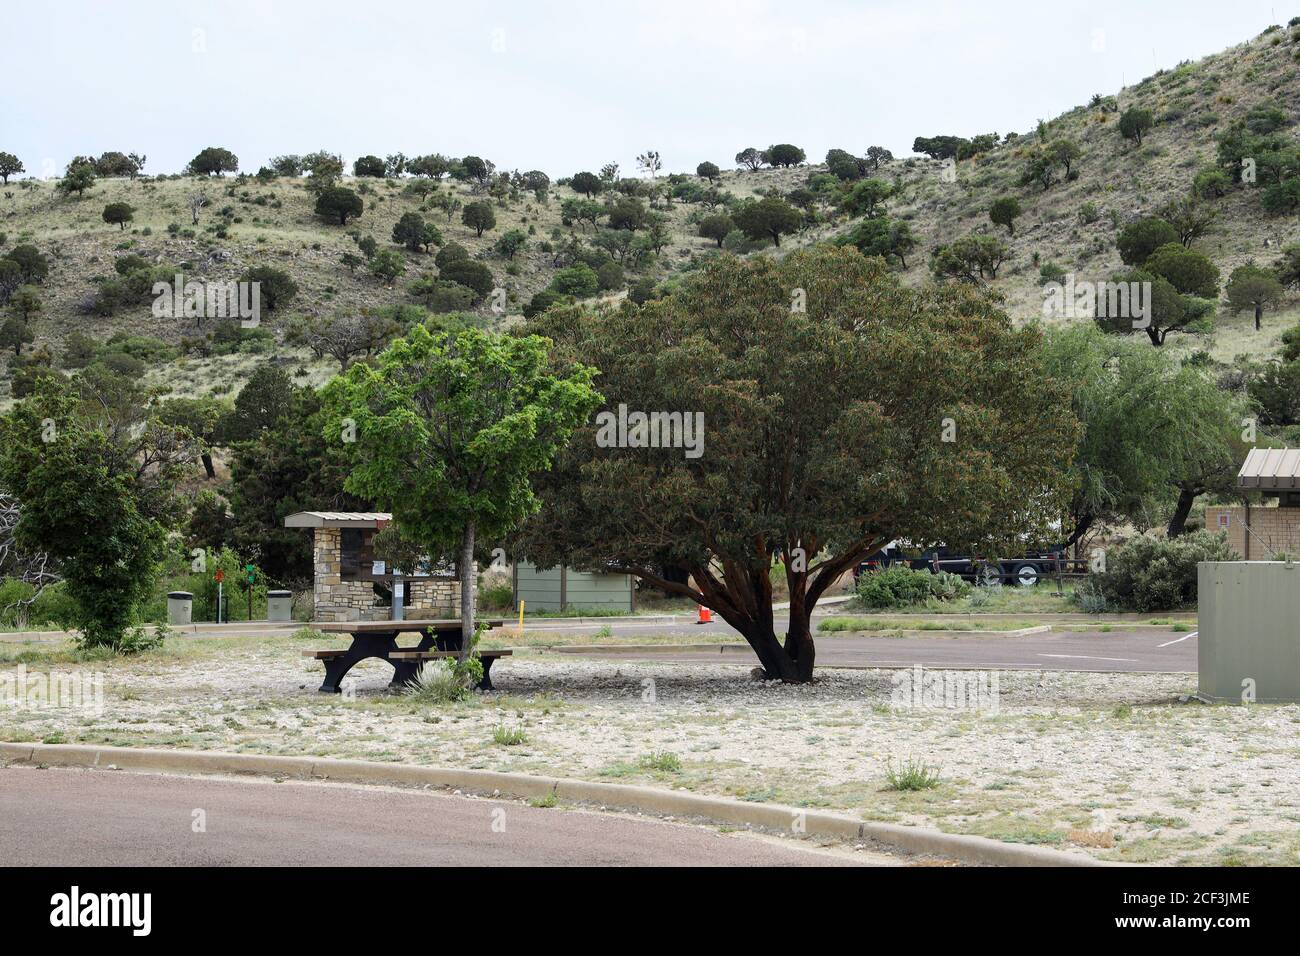 RV Camping Area des Guadalupe Mountains National Park Campground, Pine Springs, Texas Stockfoto